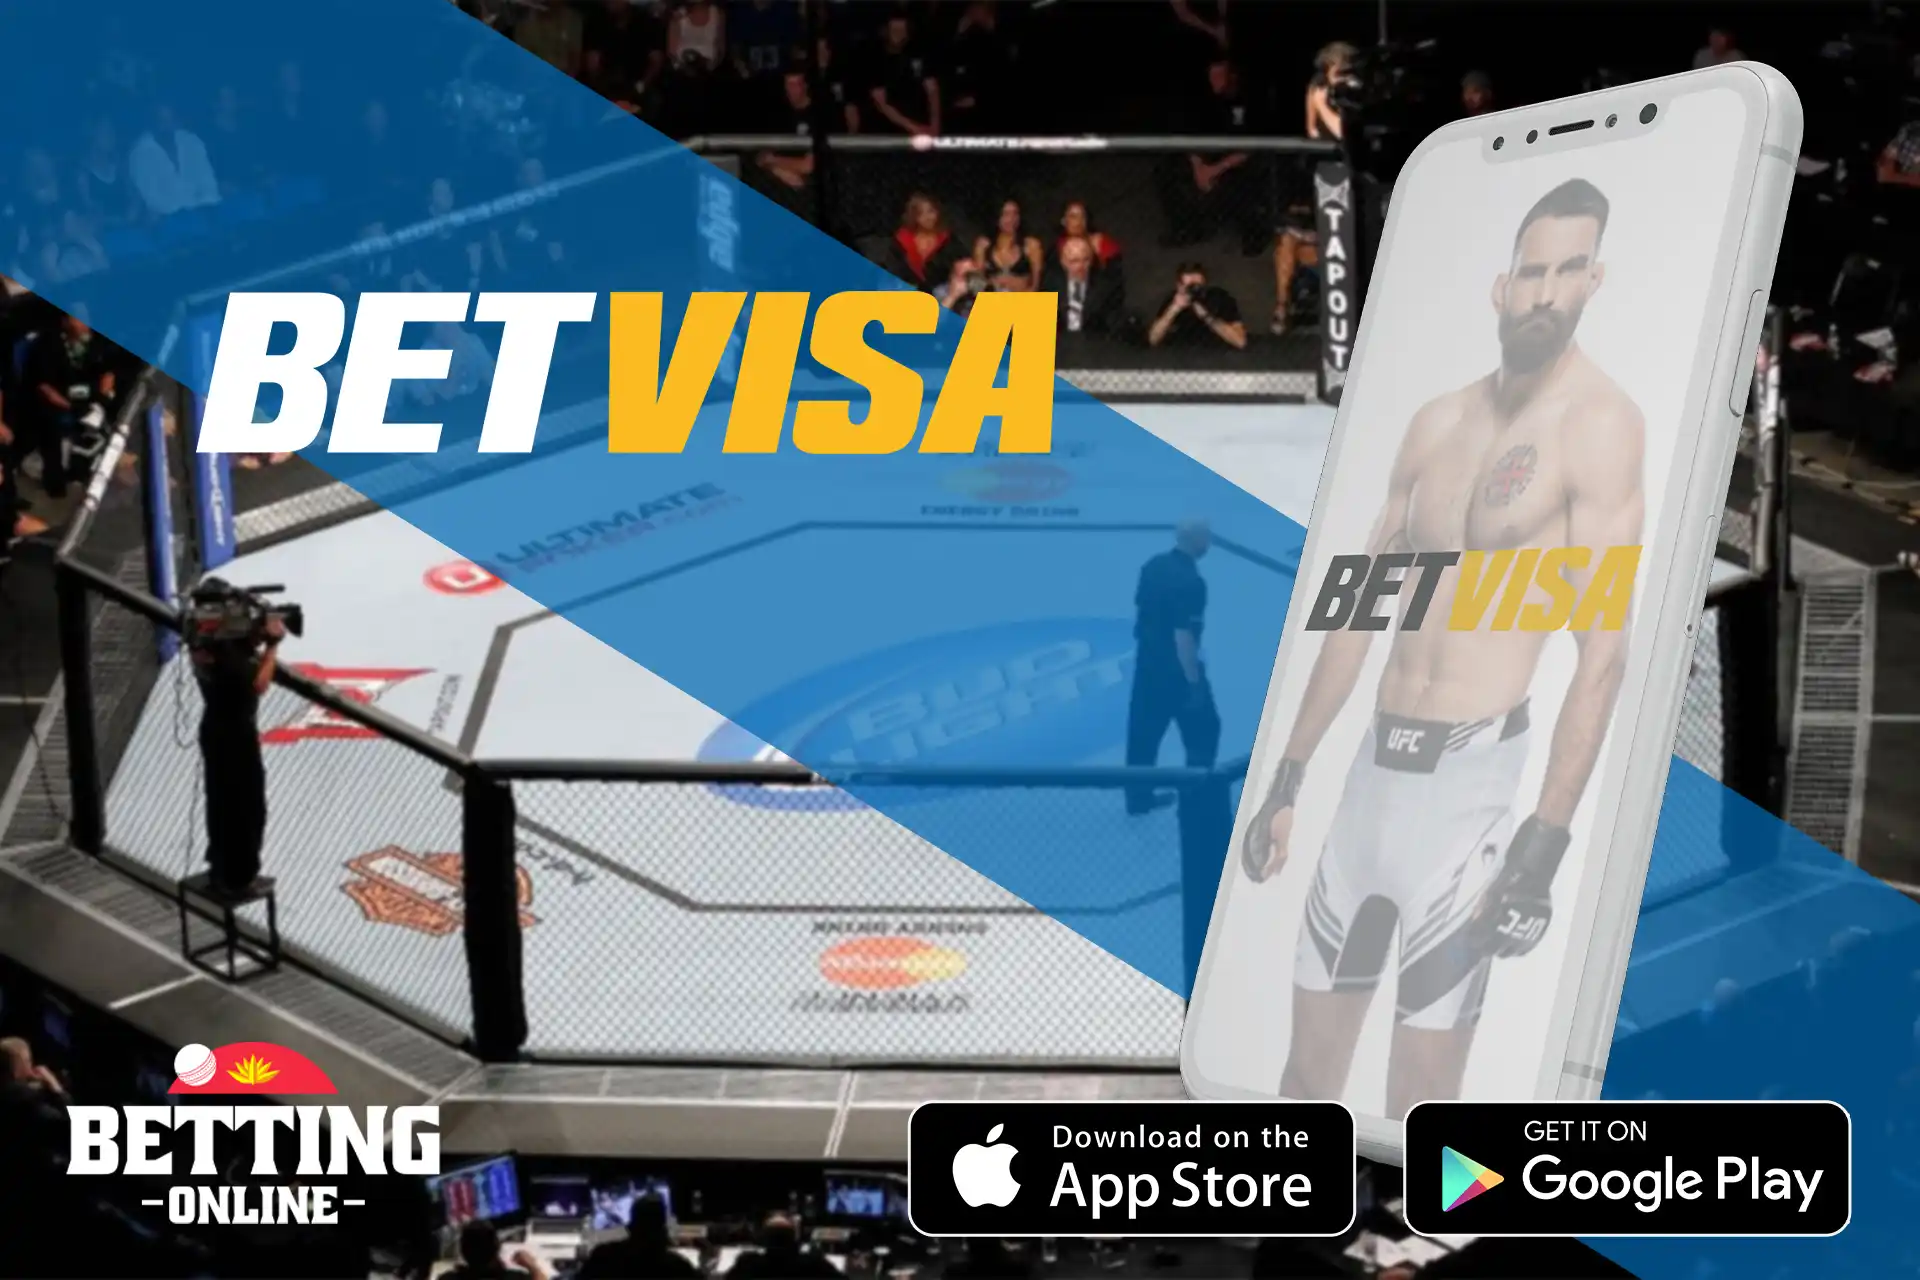 Download the Betvisa app or go online to bet on UFC.